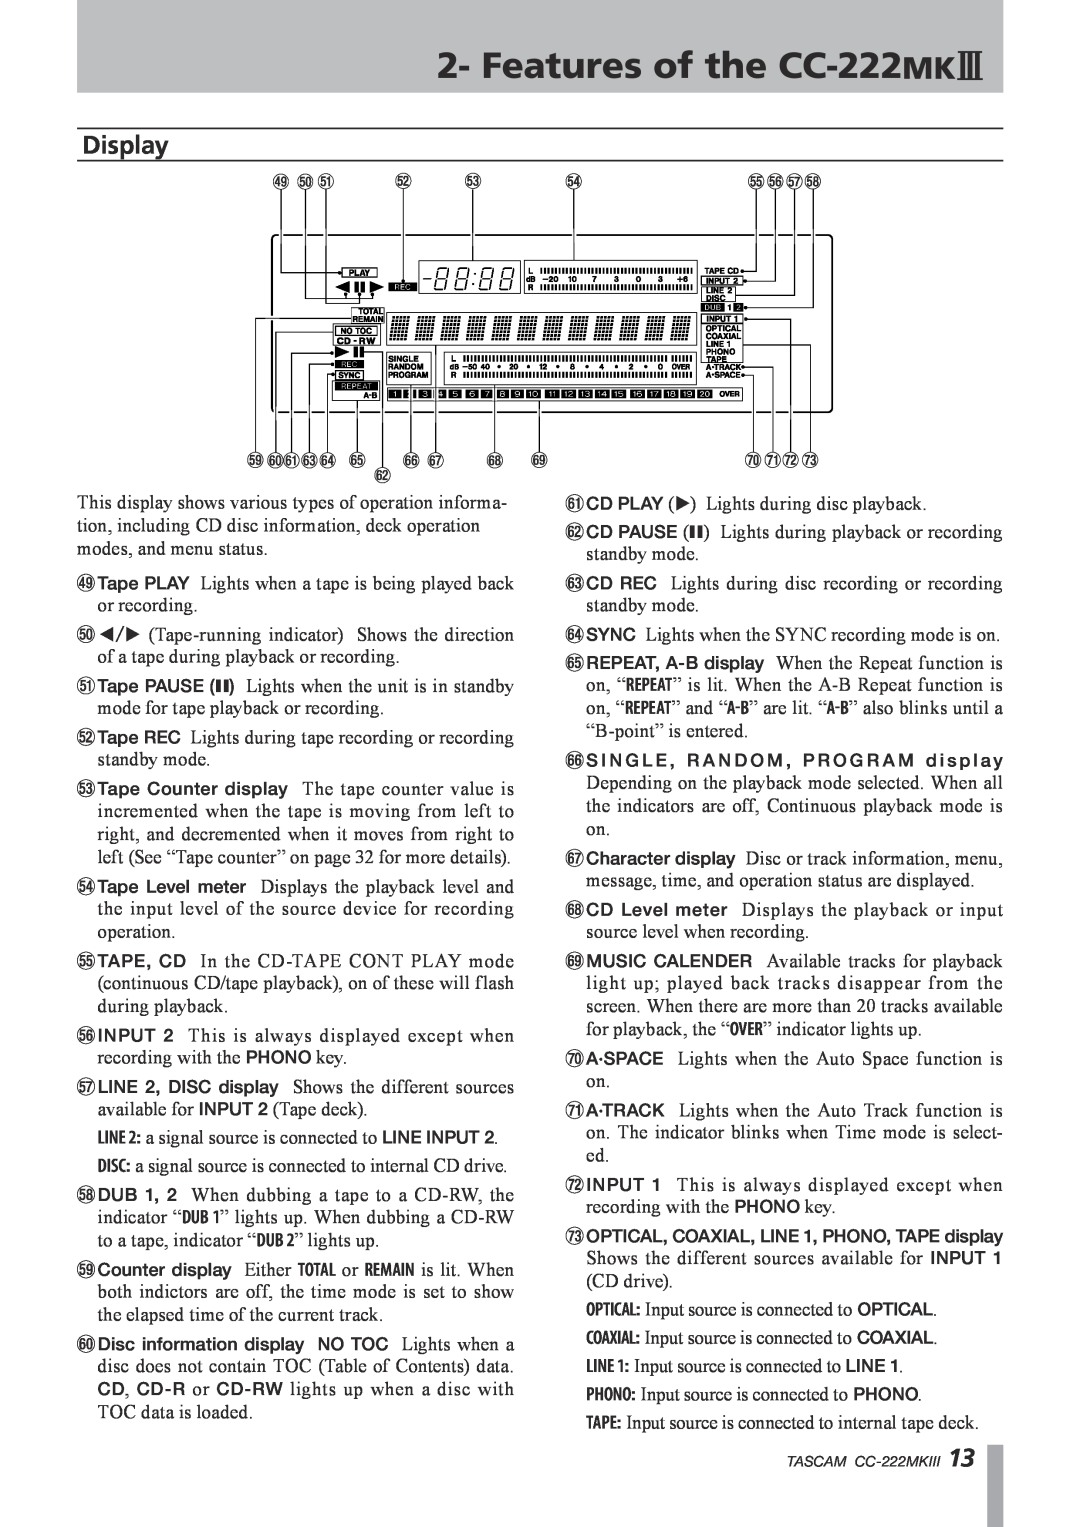 Tascam owner manual Display, Features of the CC-222MK$ 